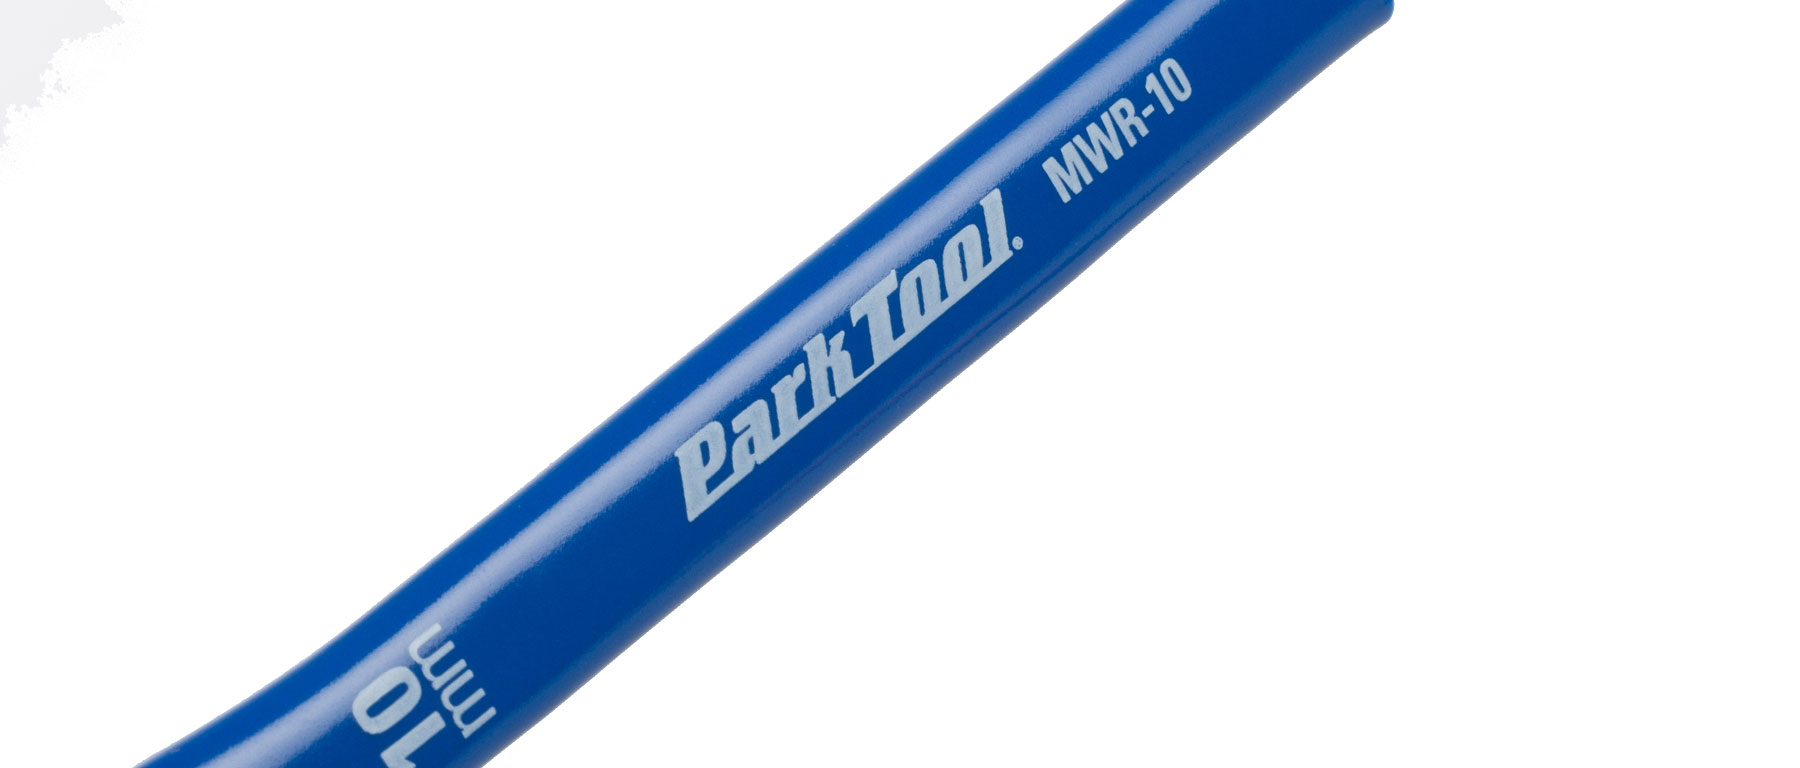 Park Tool MWR Ratcheting Metric Wrench